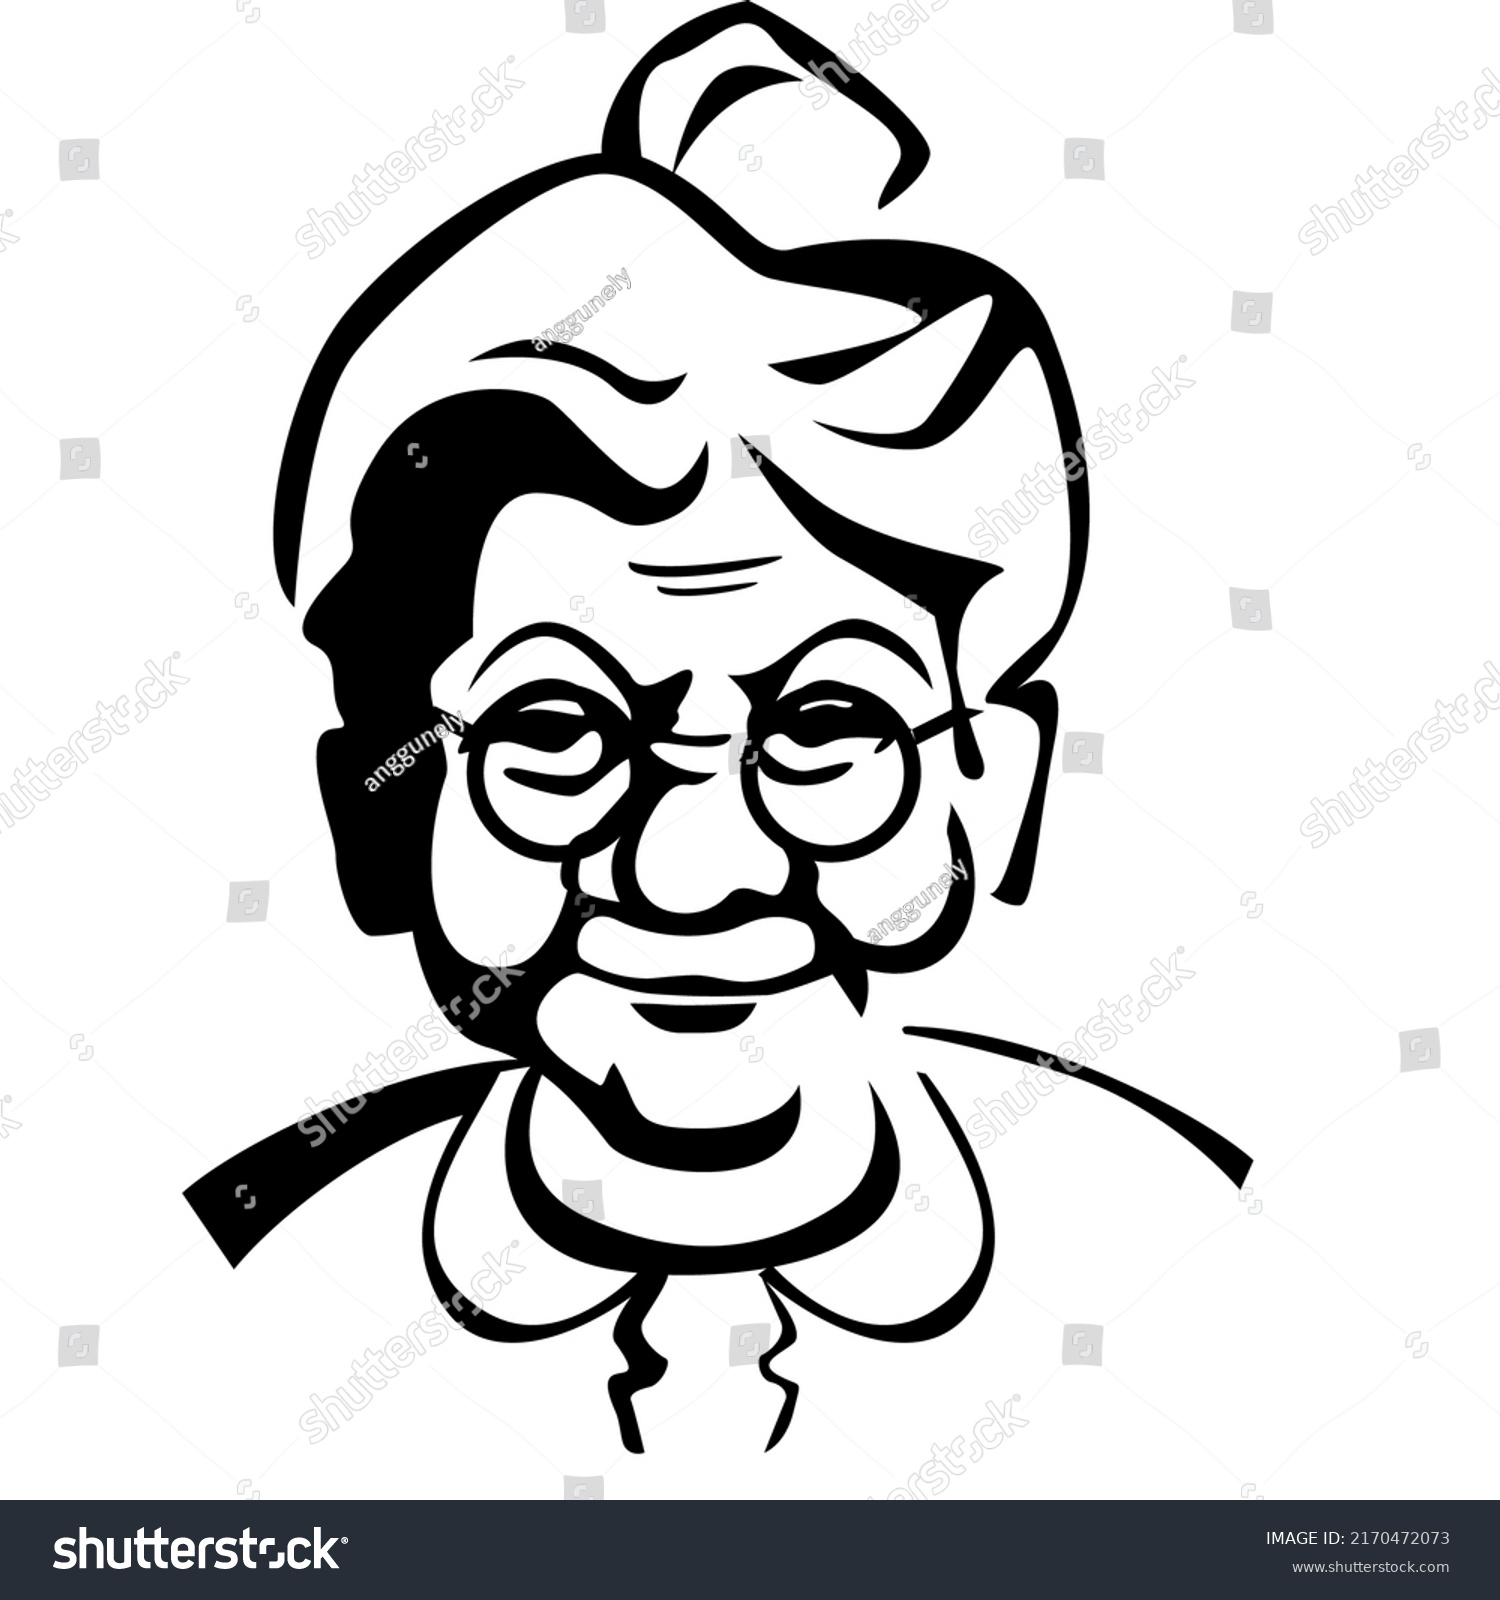 Vector Drawing Of Cartoon Old Granny In Glasses Royalty Free Stock